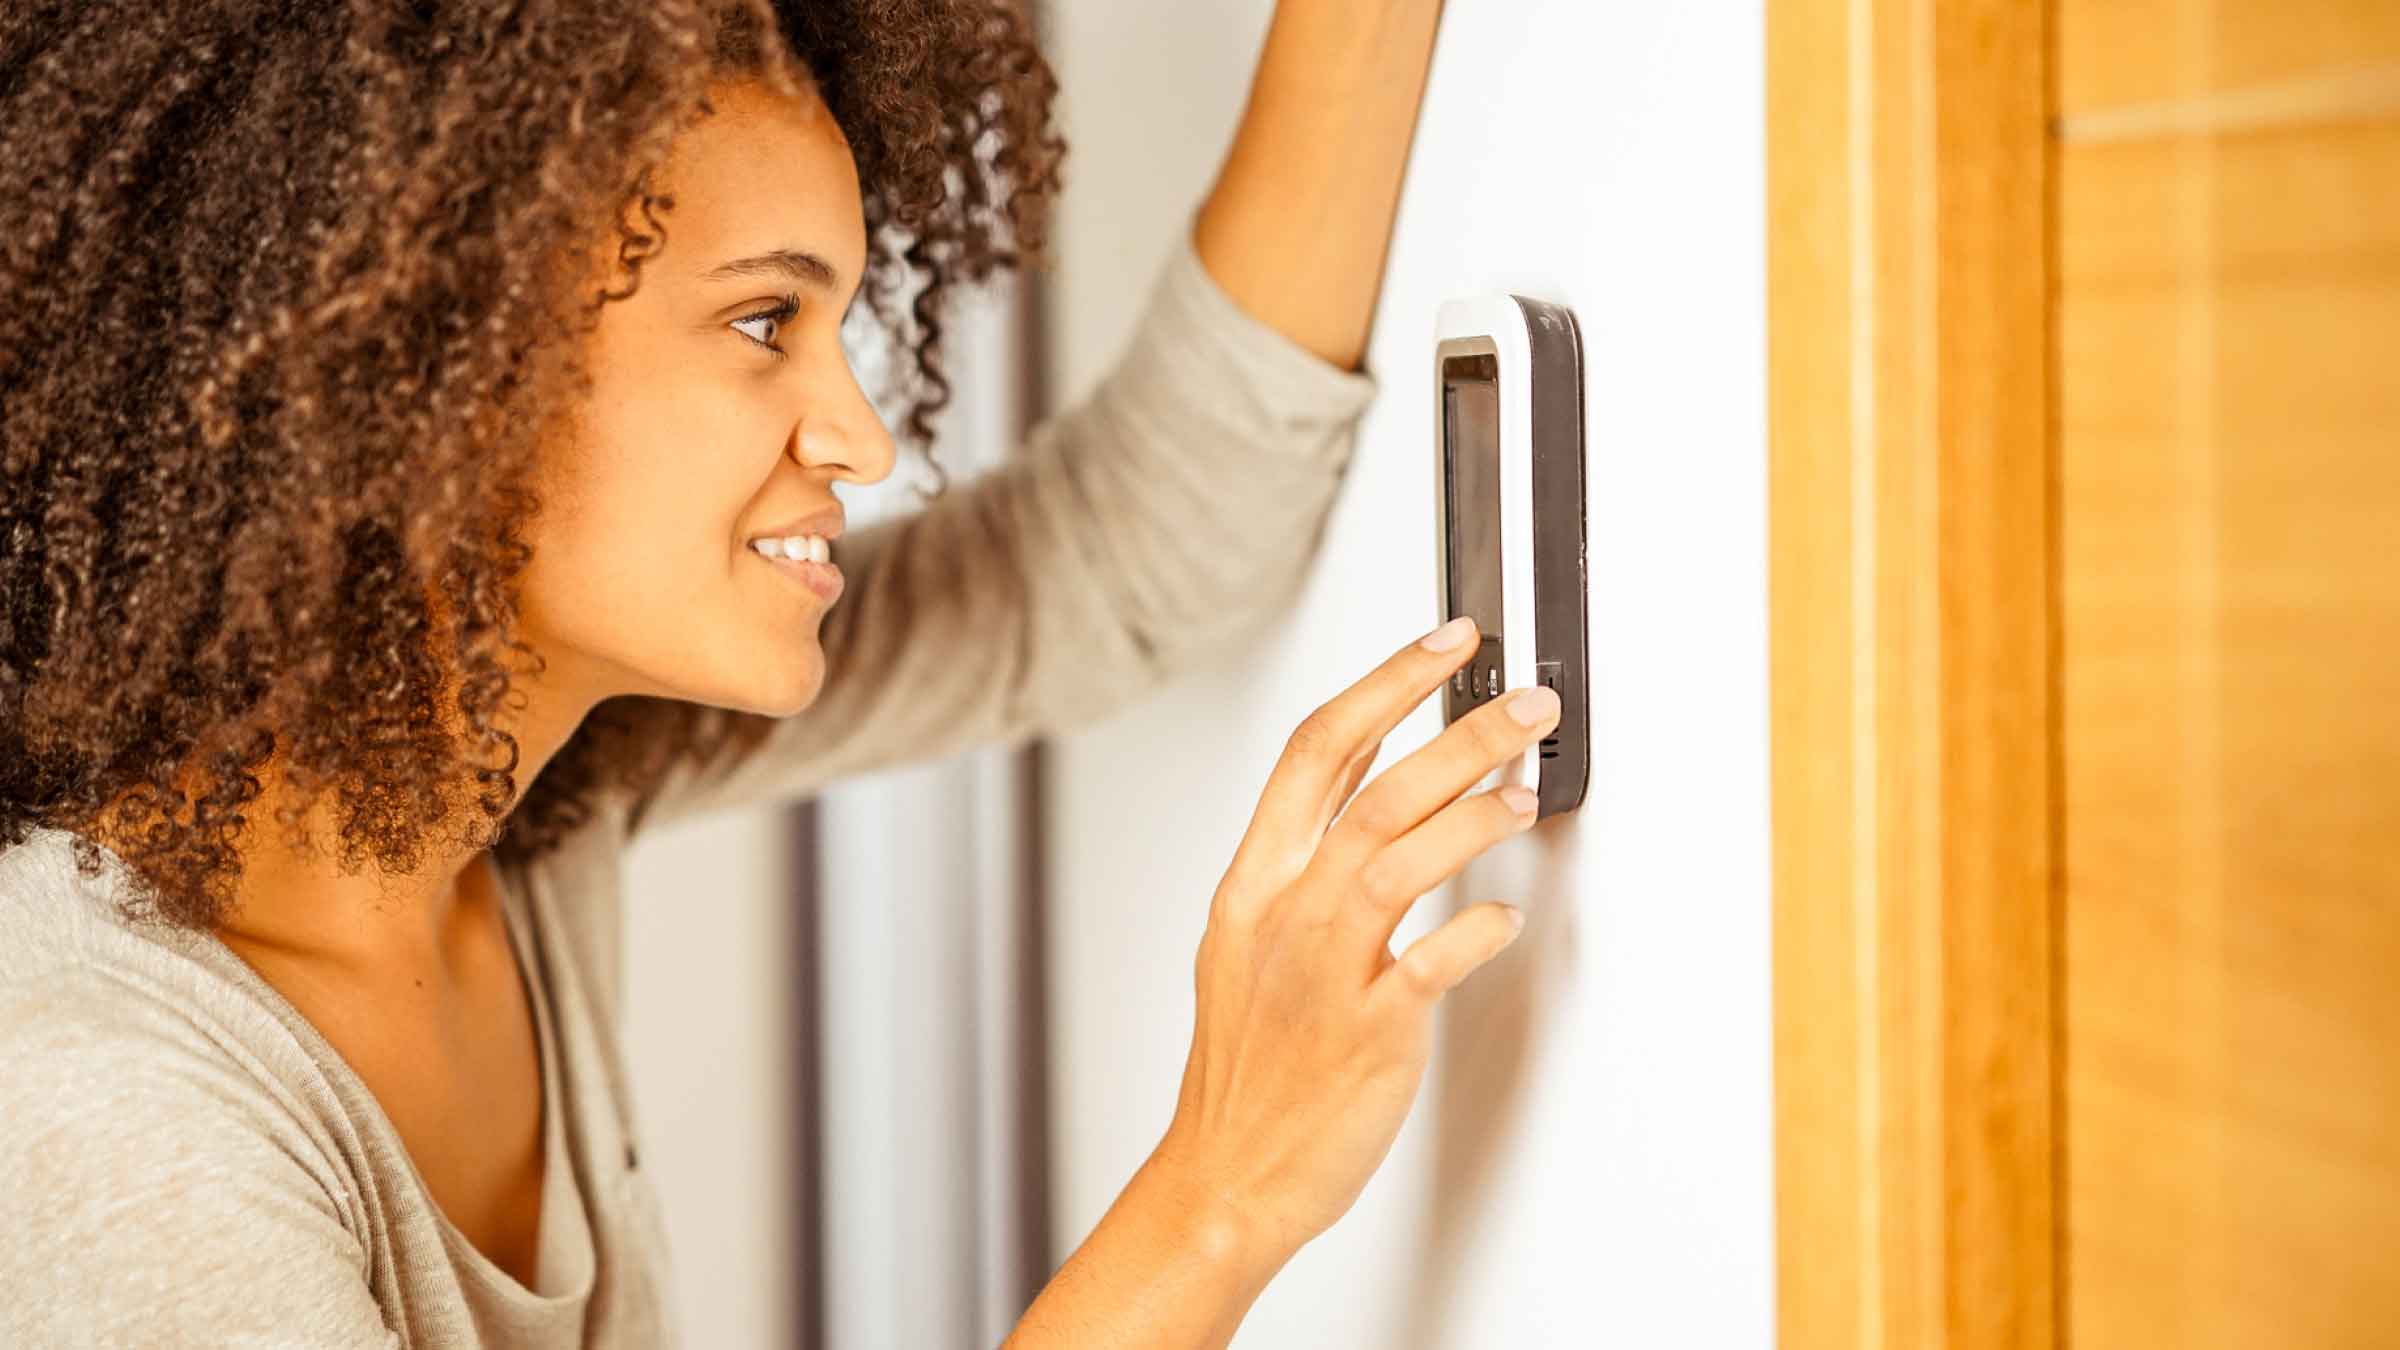 Woman leans against wall with her left arm and adjusts a smart home device with her right hand.